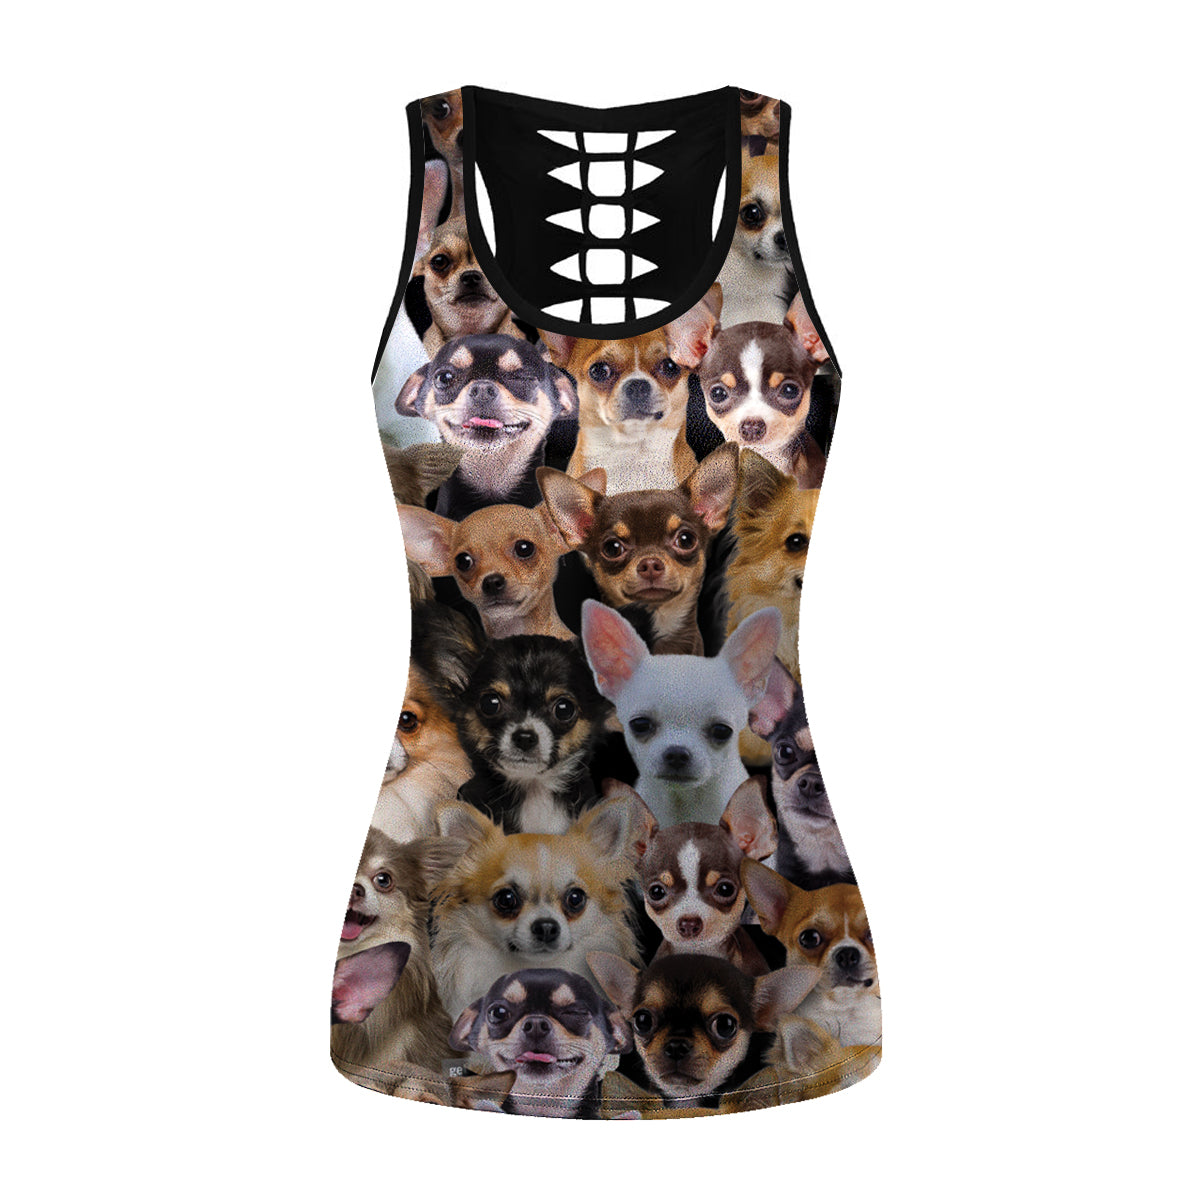 You Will Have A Bunch Of Chihuahuas - Hollow Tank Top V1